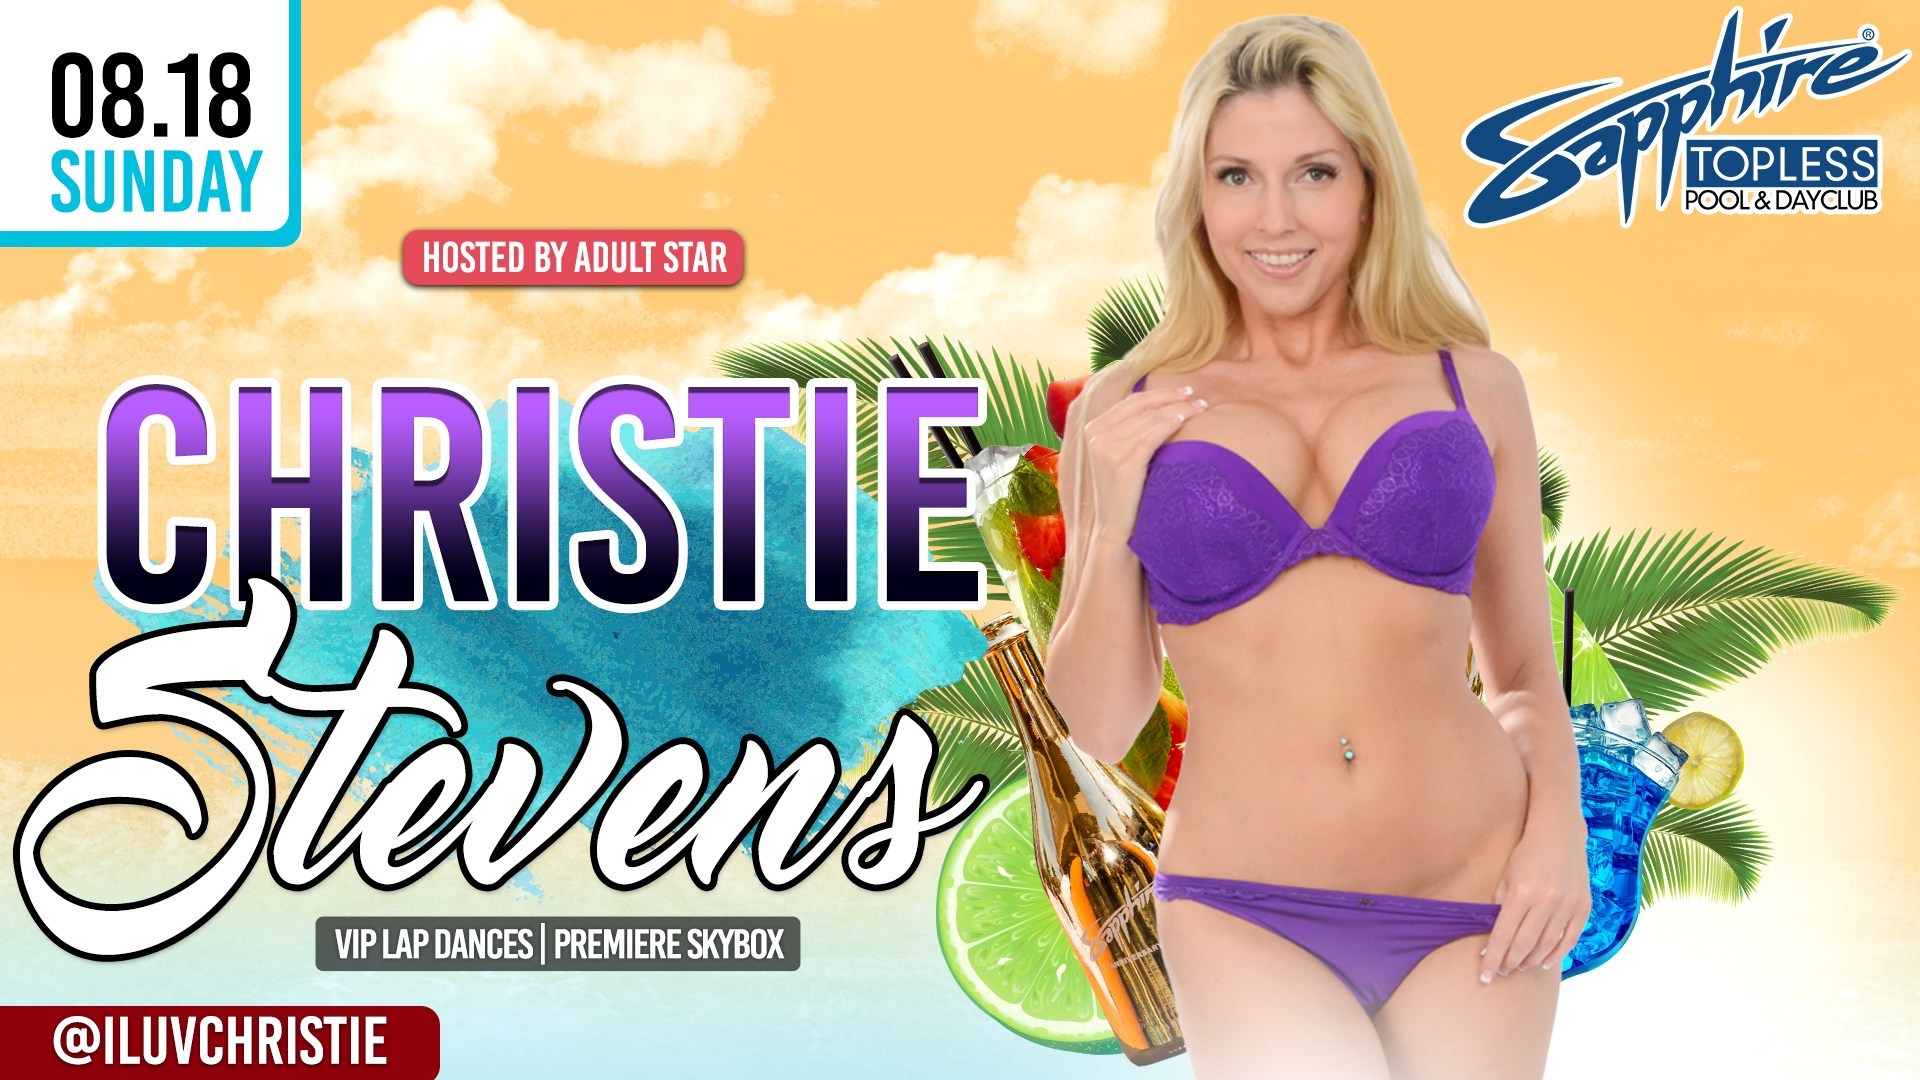 Hosted by Adult Star Christie Stevens